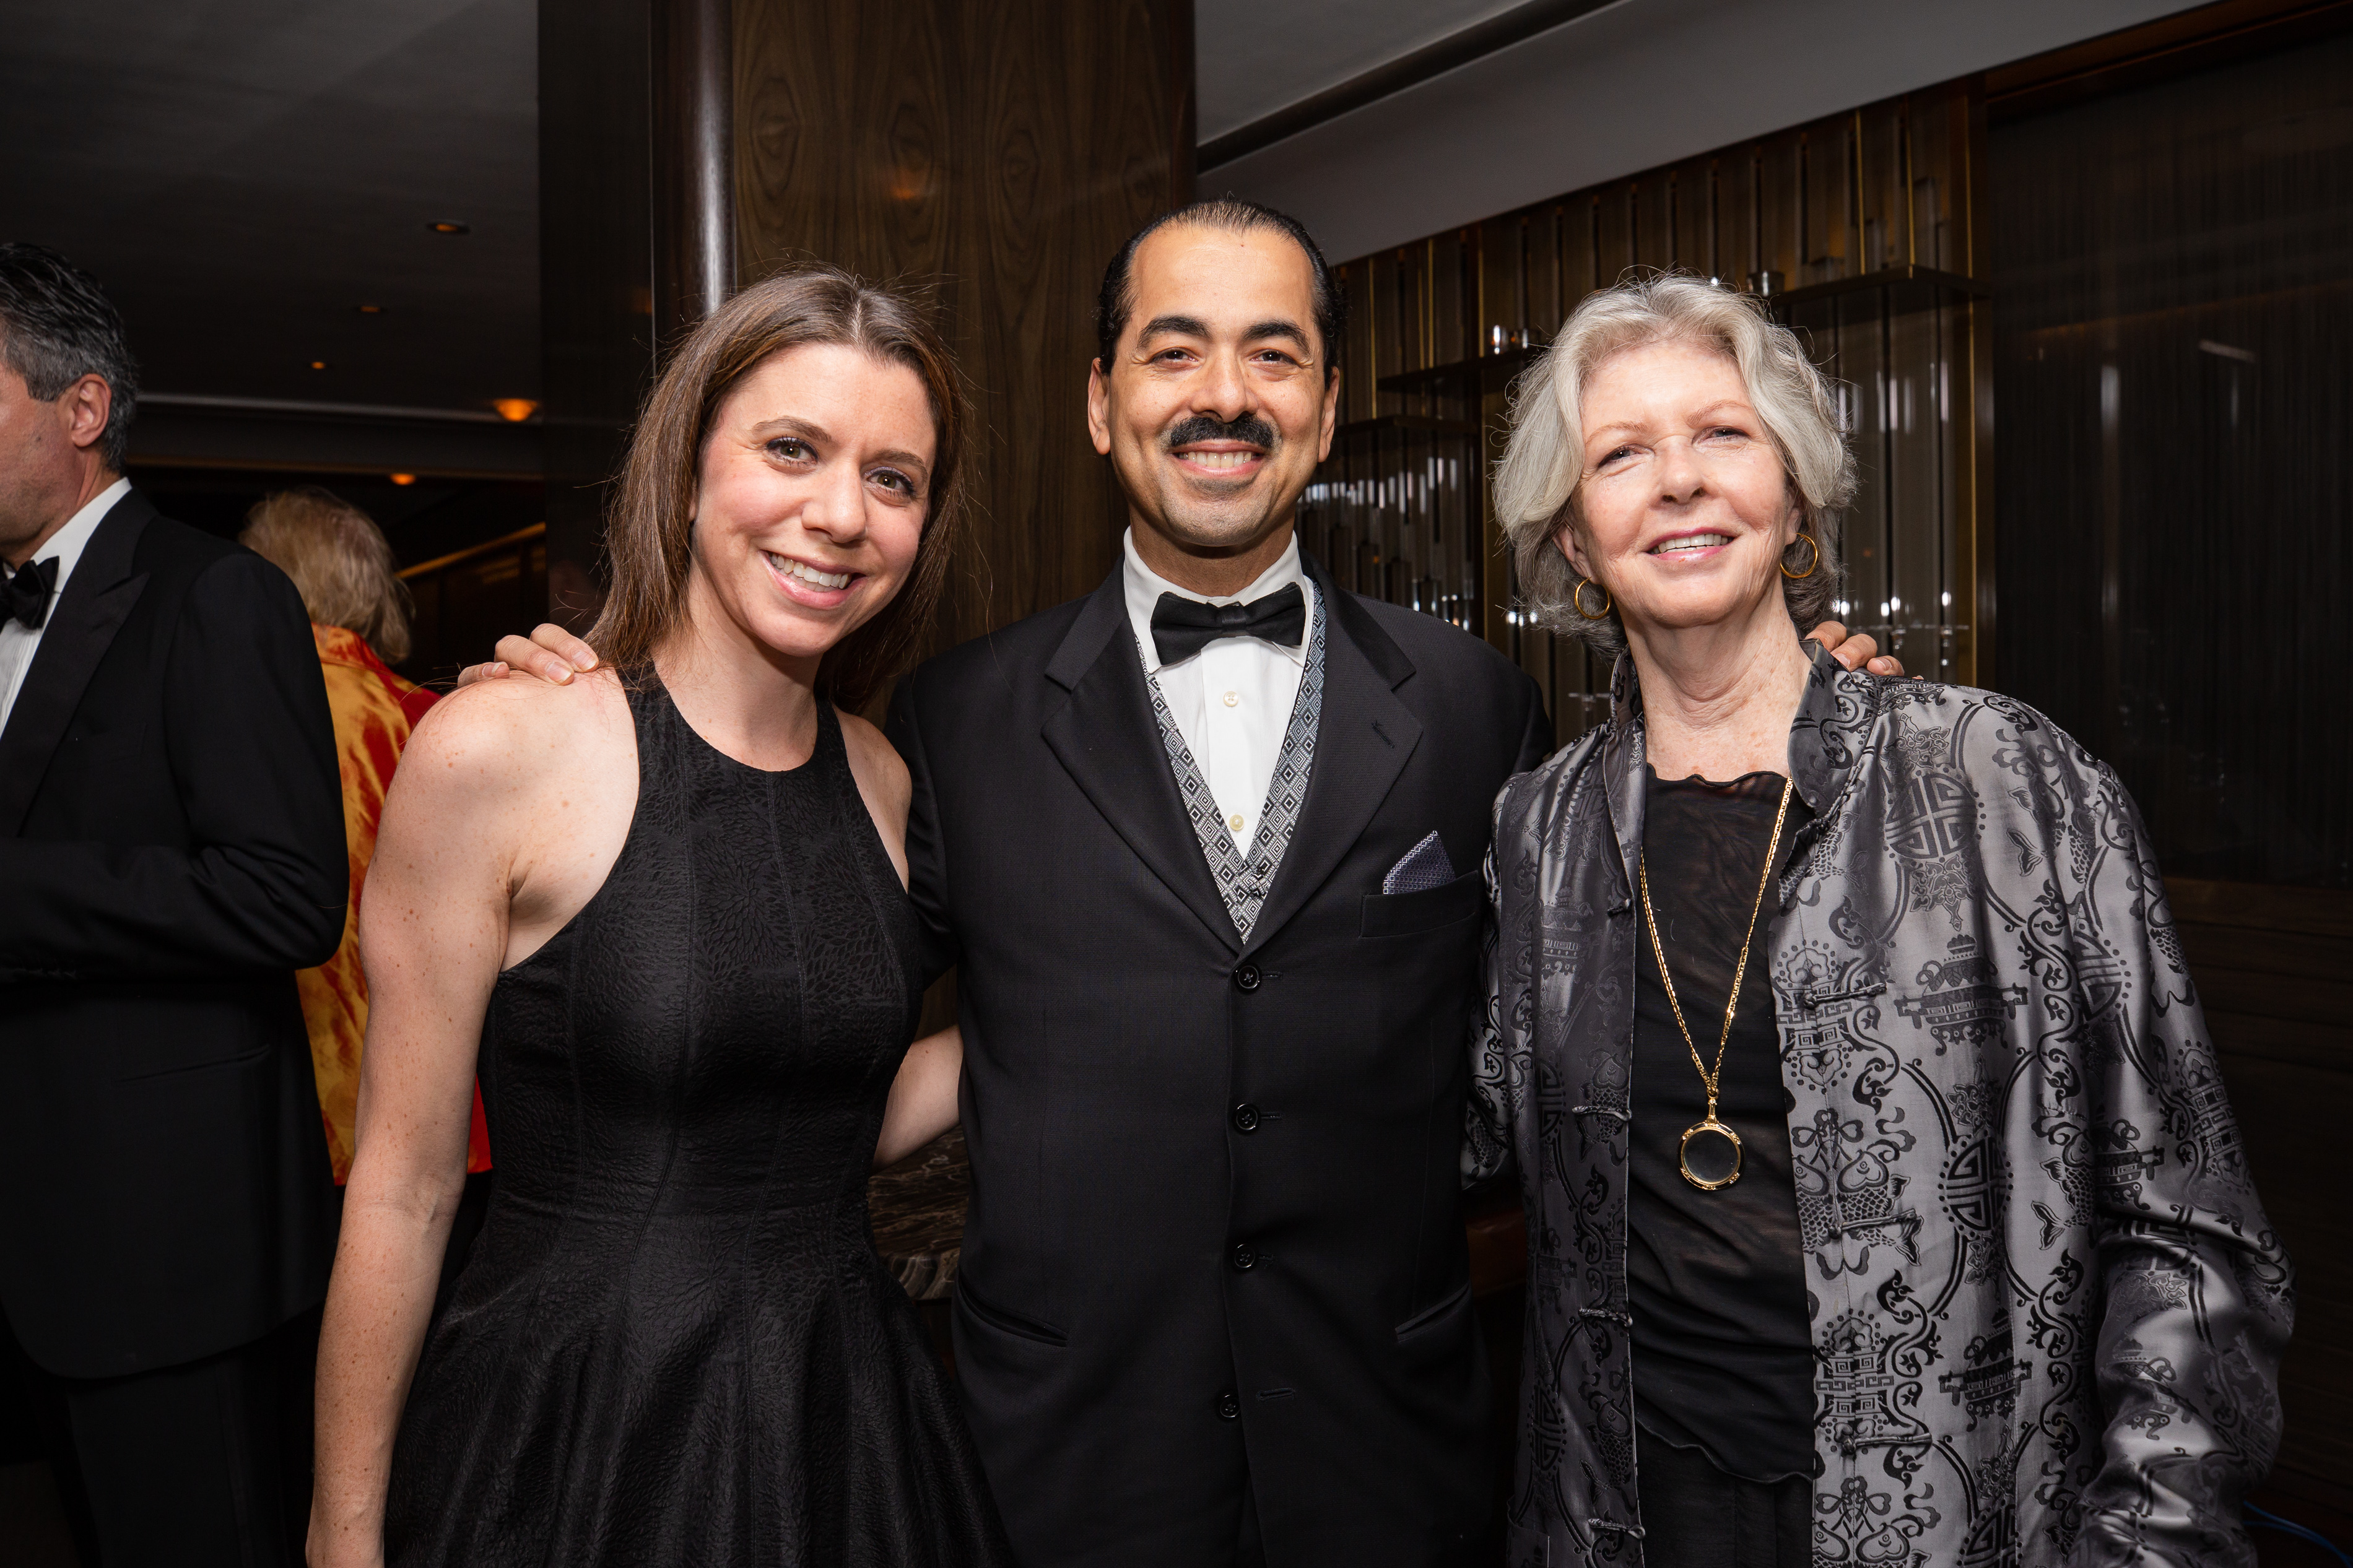 From left to right: Rebecca Gnessin and Richard Brown of American Express, Anne Dowling (photo: Liz Ligon)